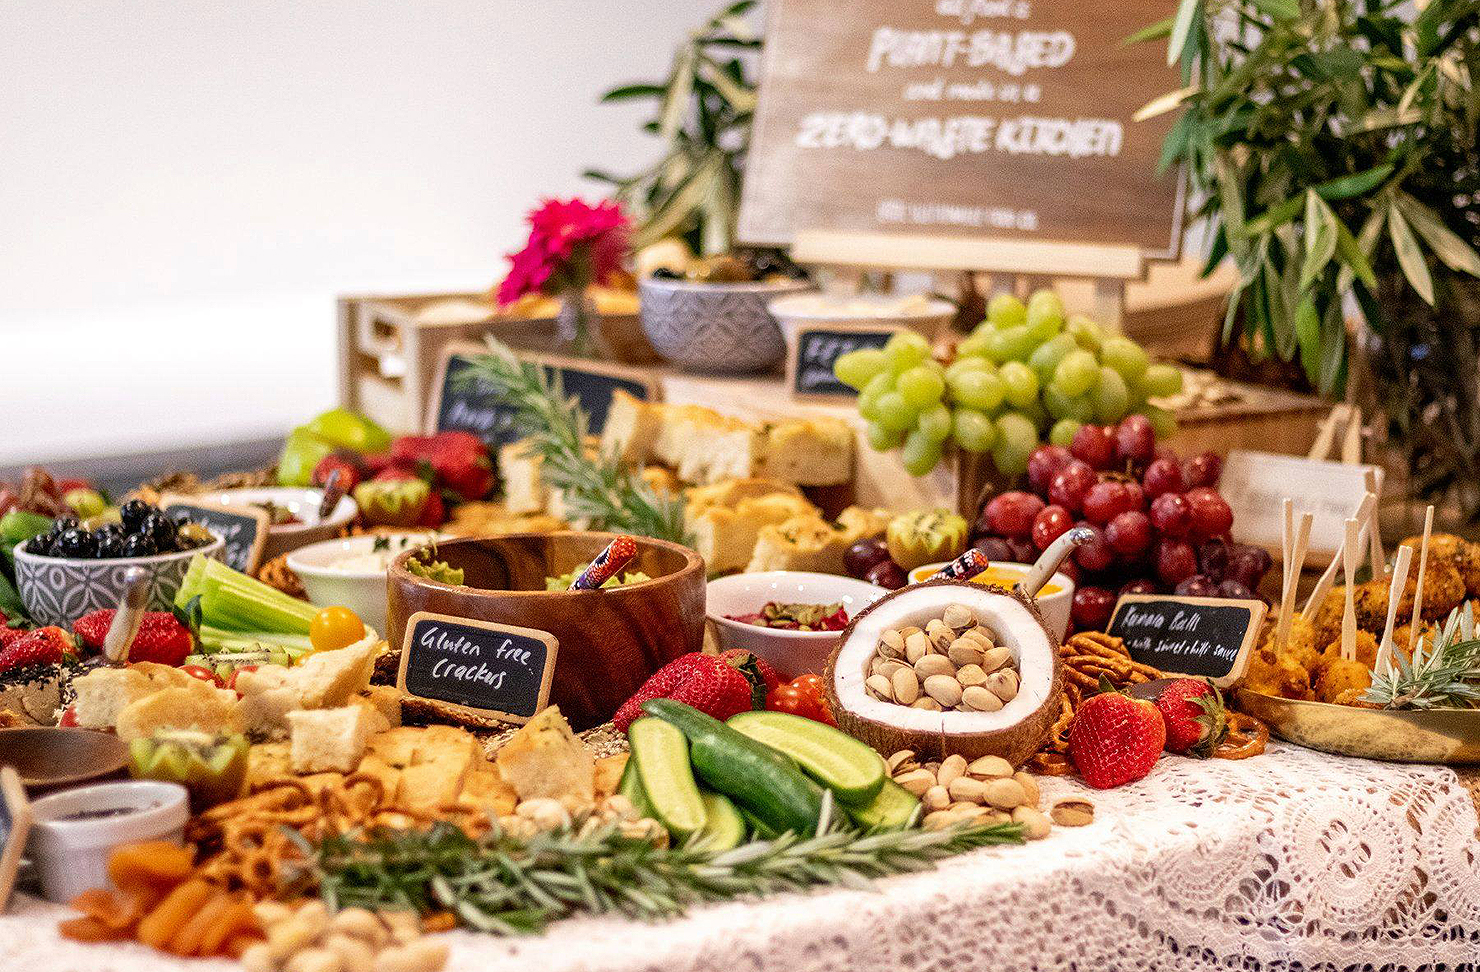 A platter from the Sustainable Food co company showing all sorts of goodies waiting to be devoured.